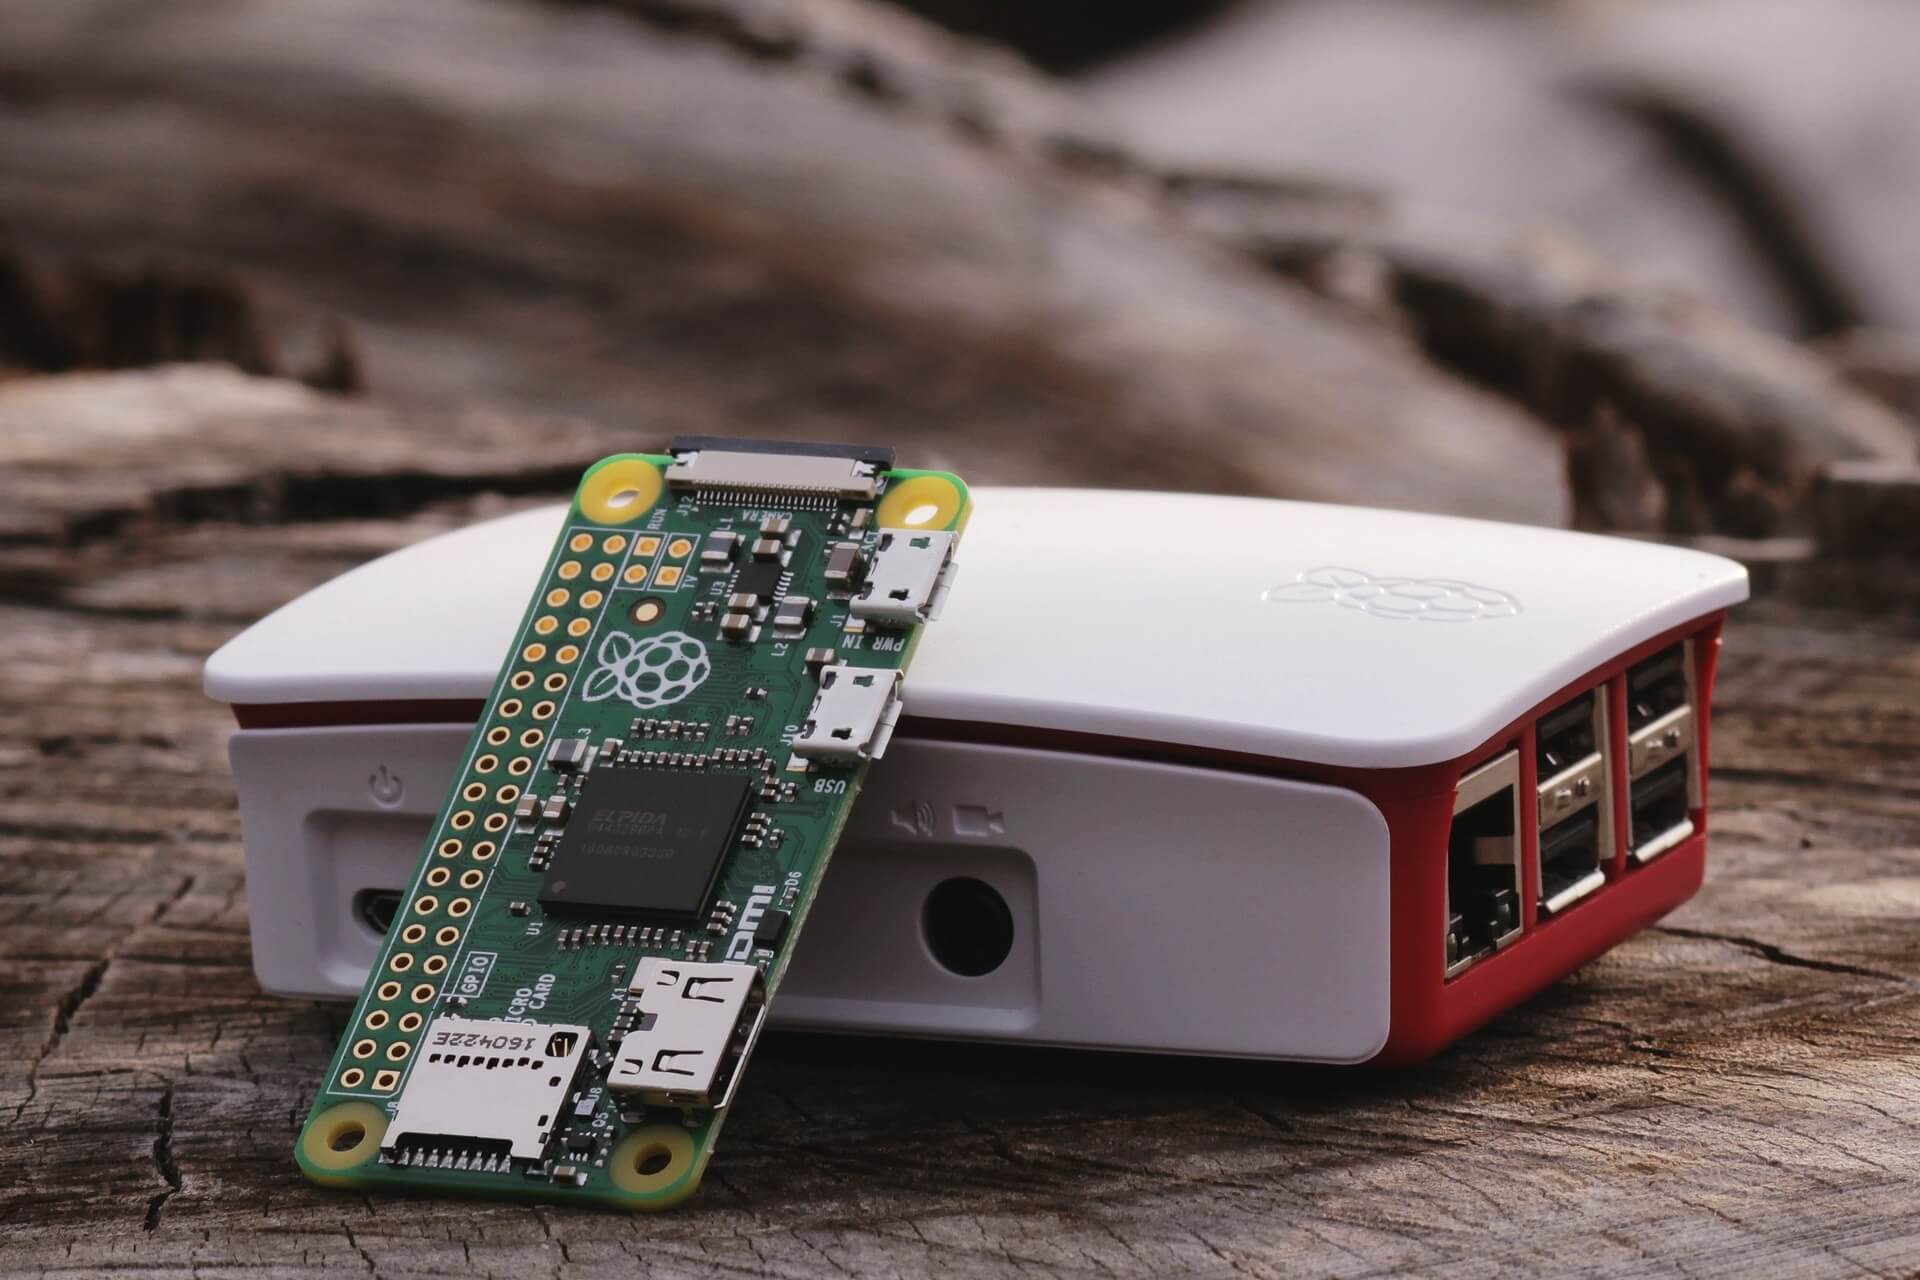 Raspberry Pi HDMI not working? Follow these simple